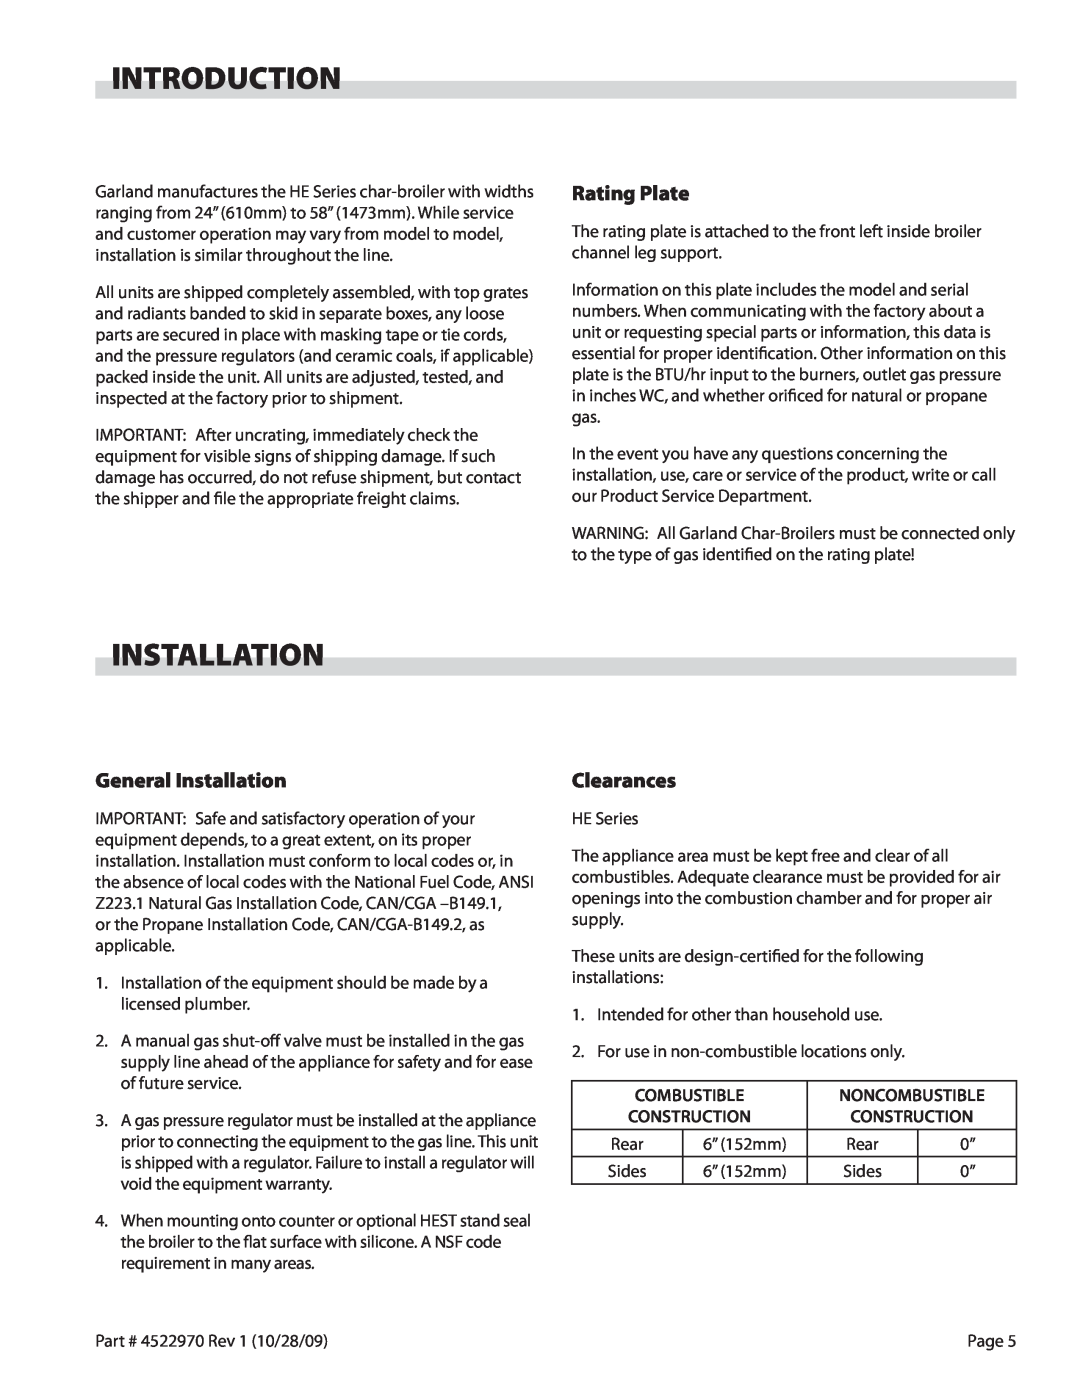 Garland 4522970 REV 1 operation manual Introduction, Rating Plate, General Installation, Clearances 